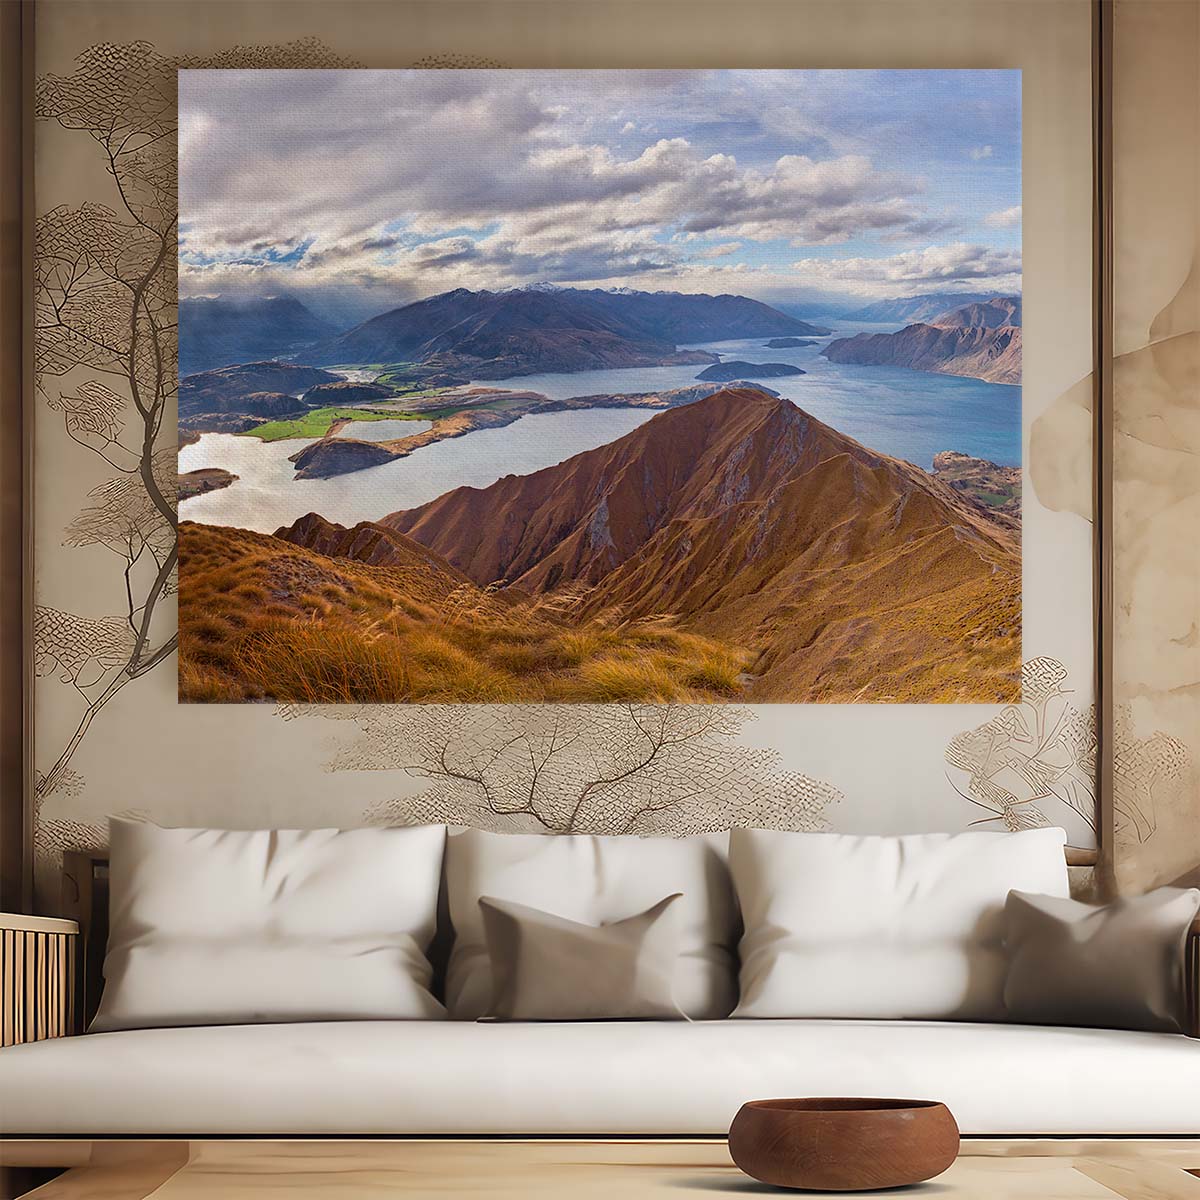 Roy's Peak Panoramic New Zealand Landscape Wall Art by Luxuriance Designs. Made in USA.